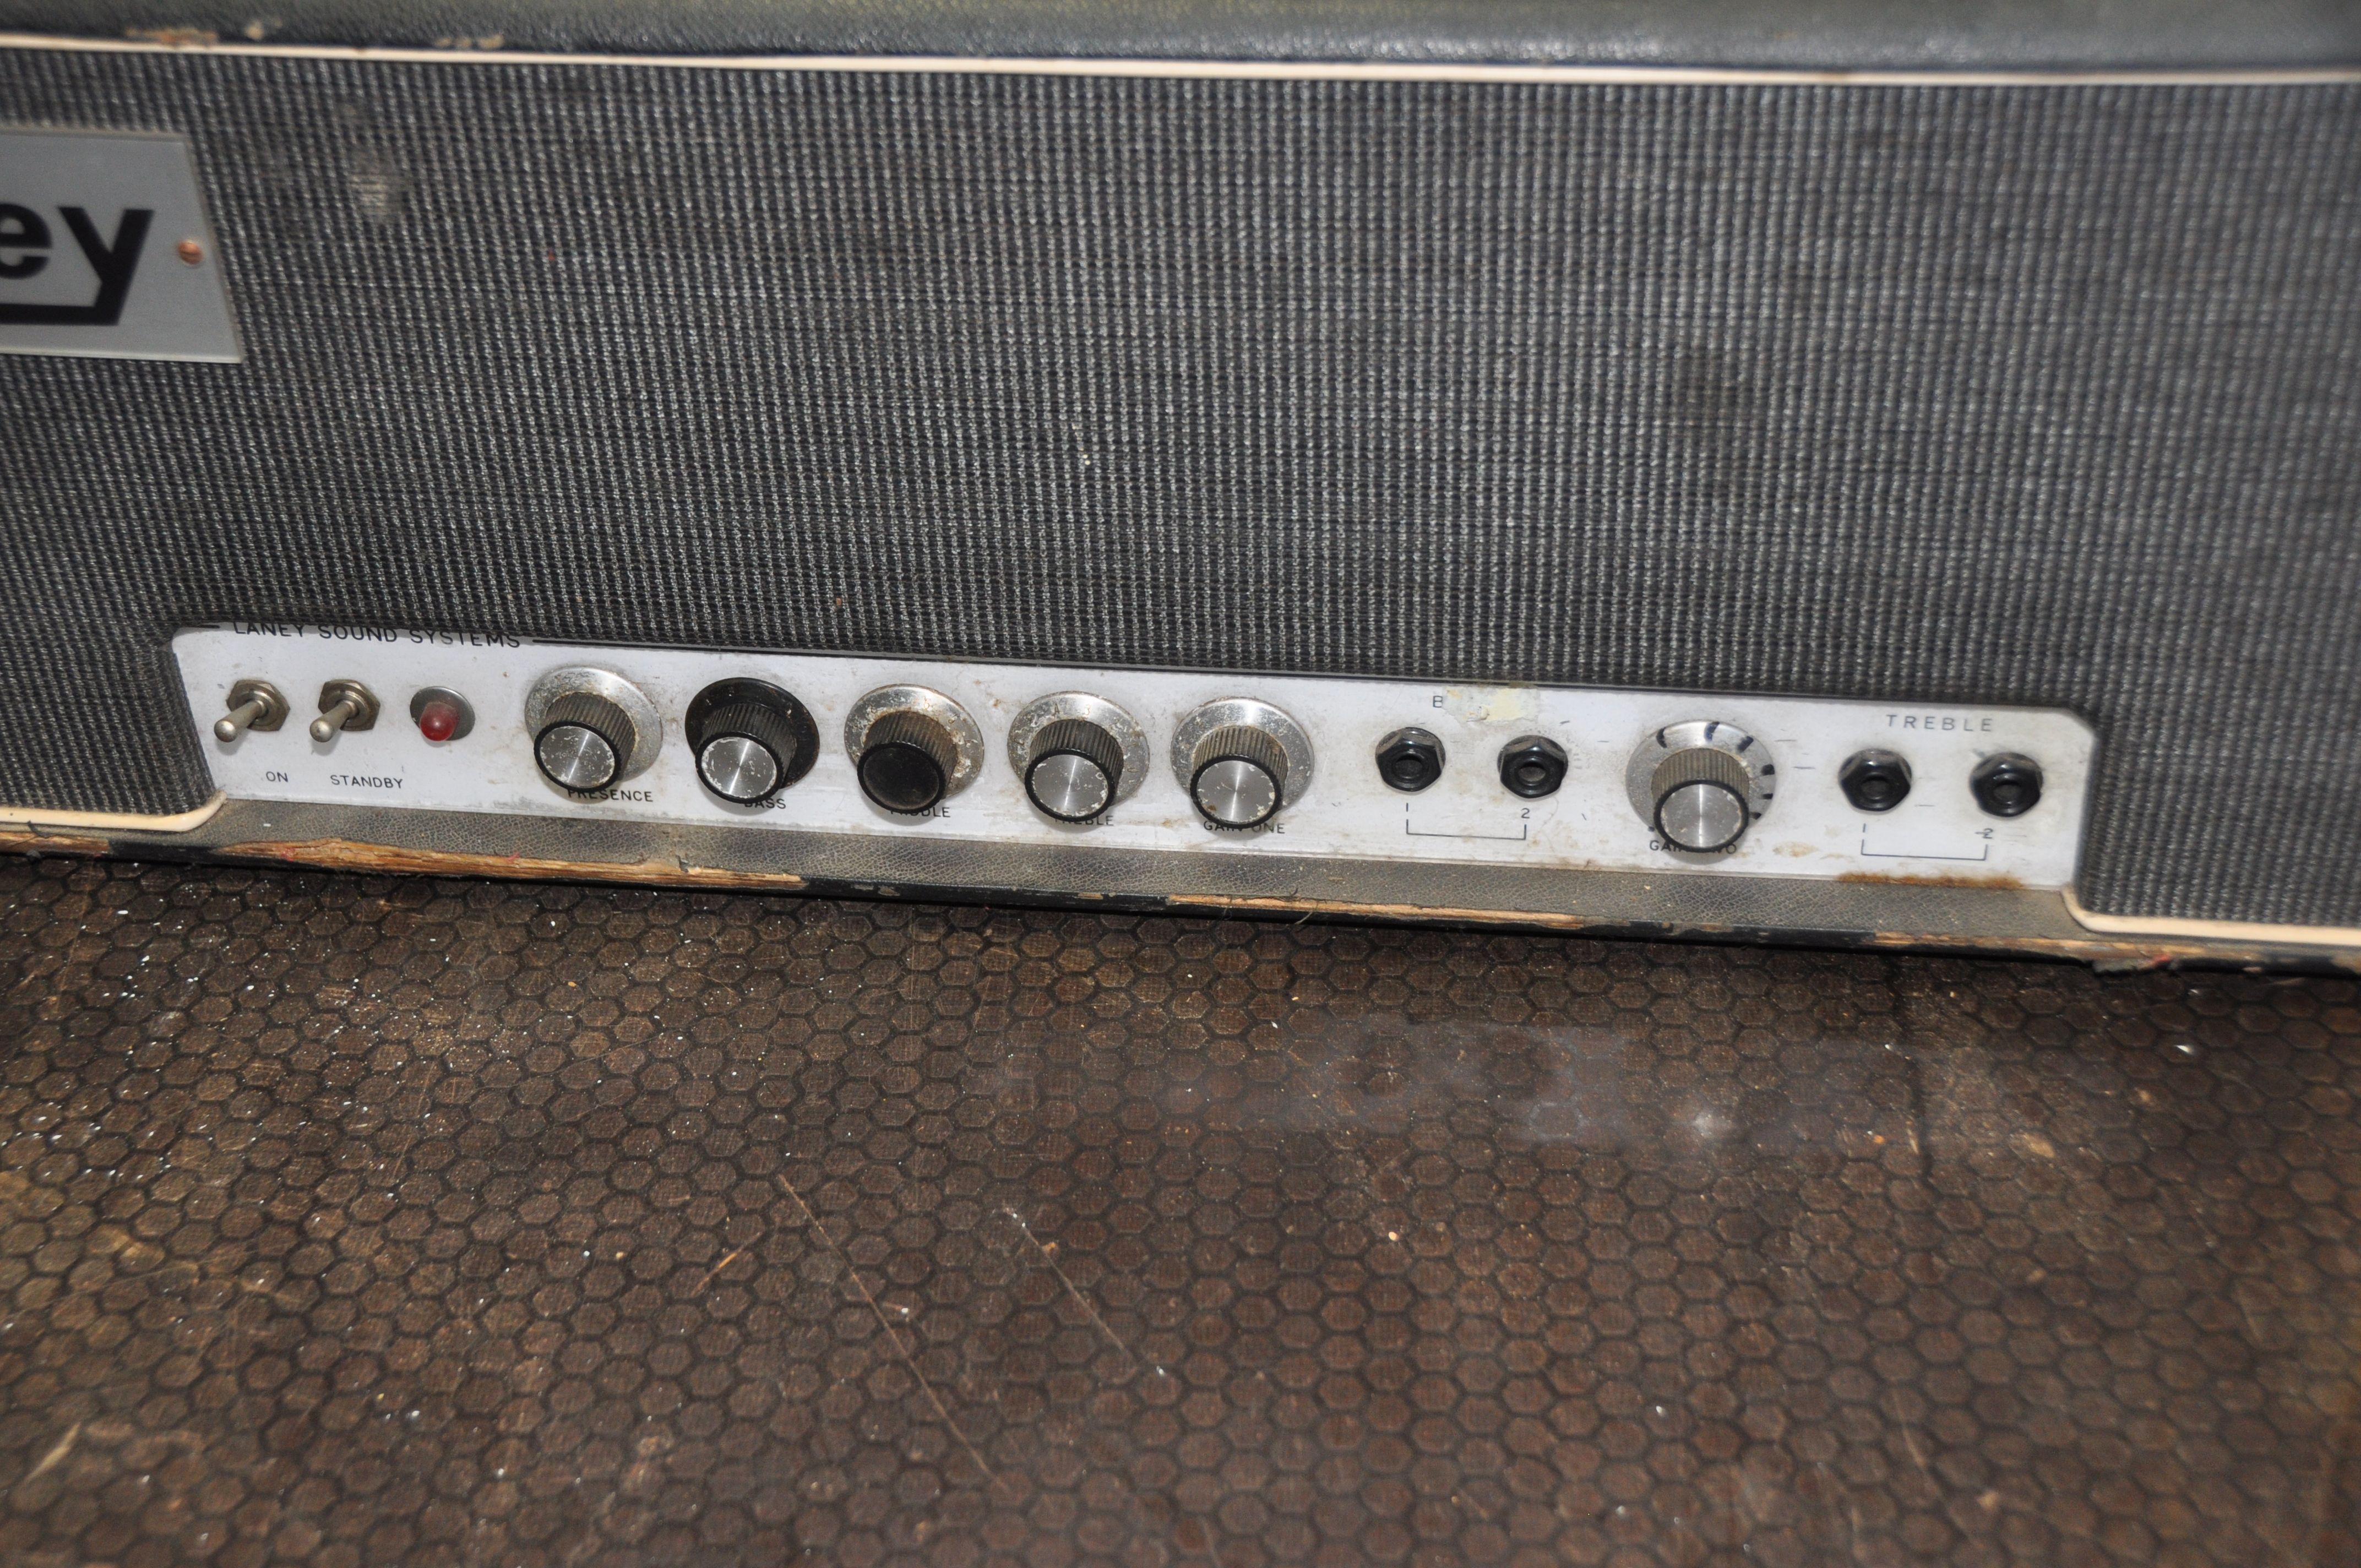 AN EARLY LANEY 100 WATT VALVE GUITAR AMPLIFIER HEAD Serial Number 326 (no power cable so UNTESTED)( - Image 2 of 6